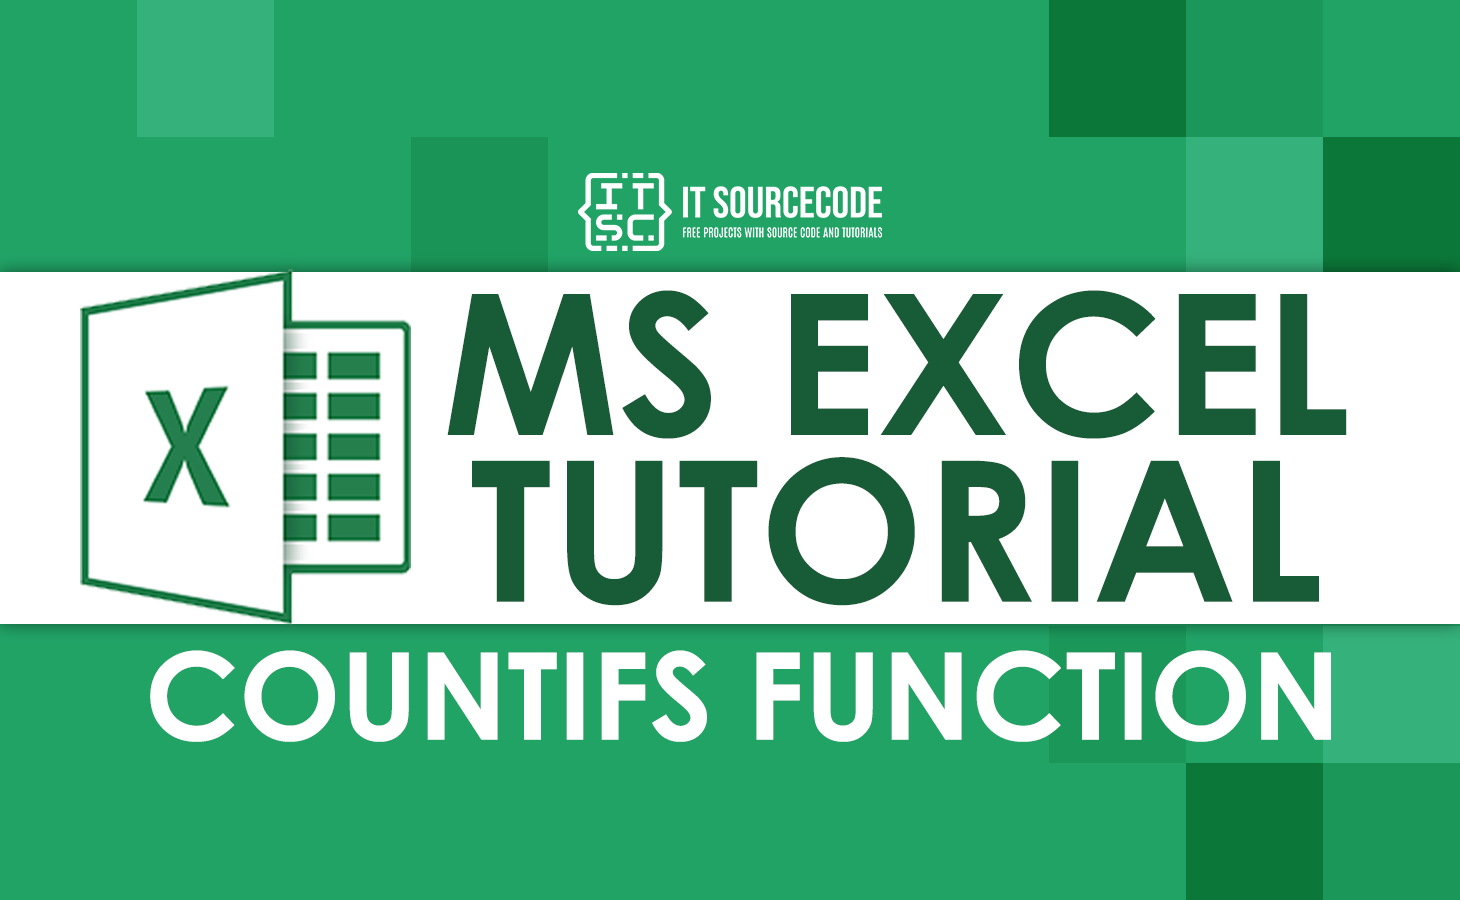 COUNTIFS FUNCTION